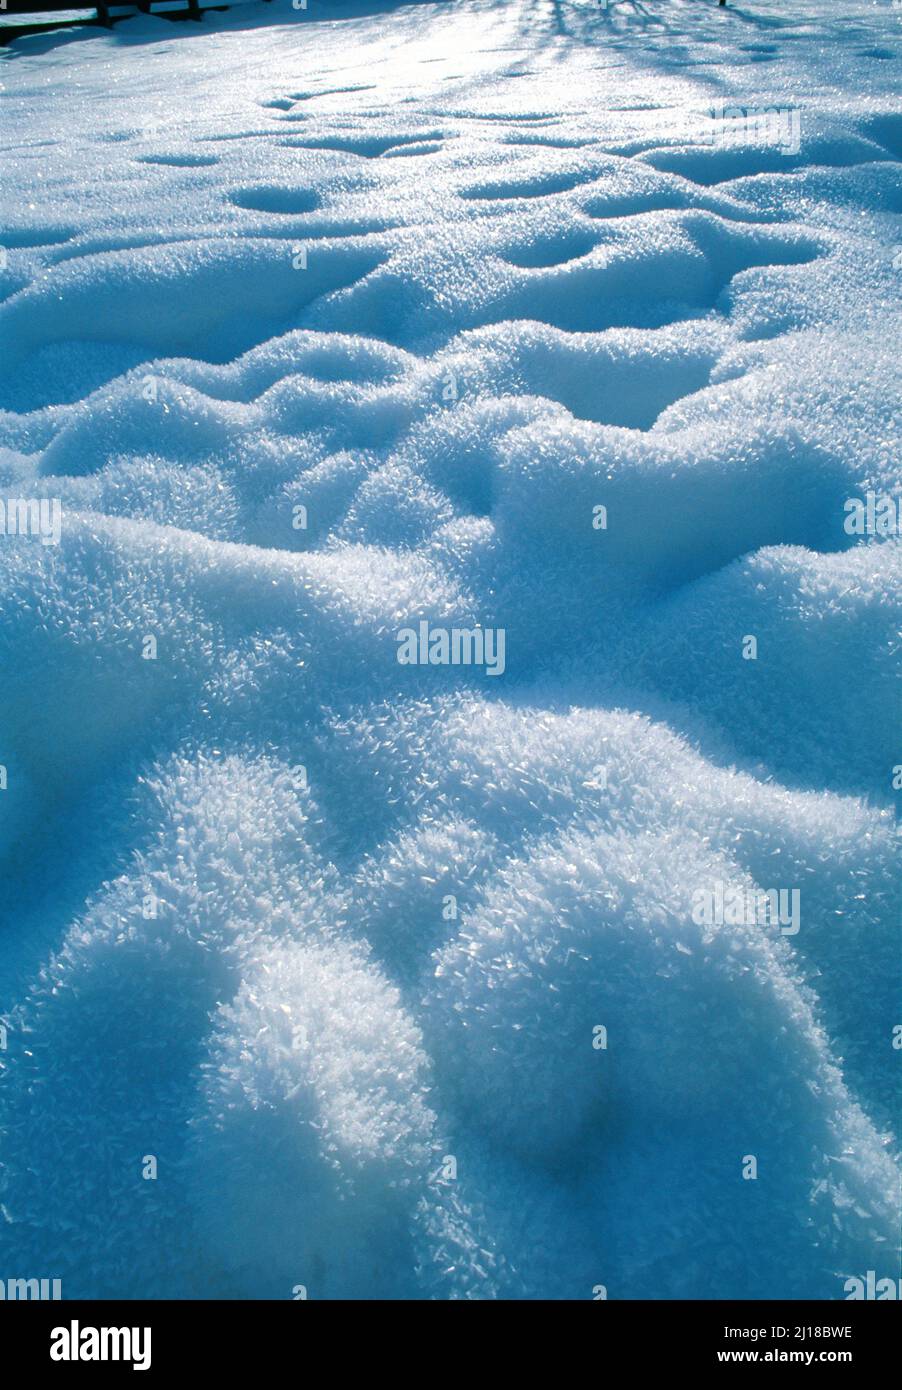 frosted, fresh snow fall, Stock Photo